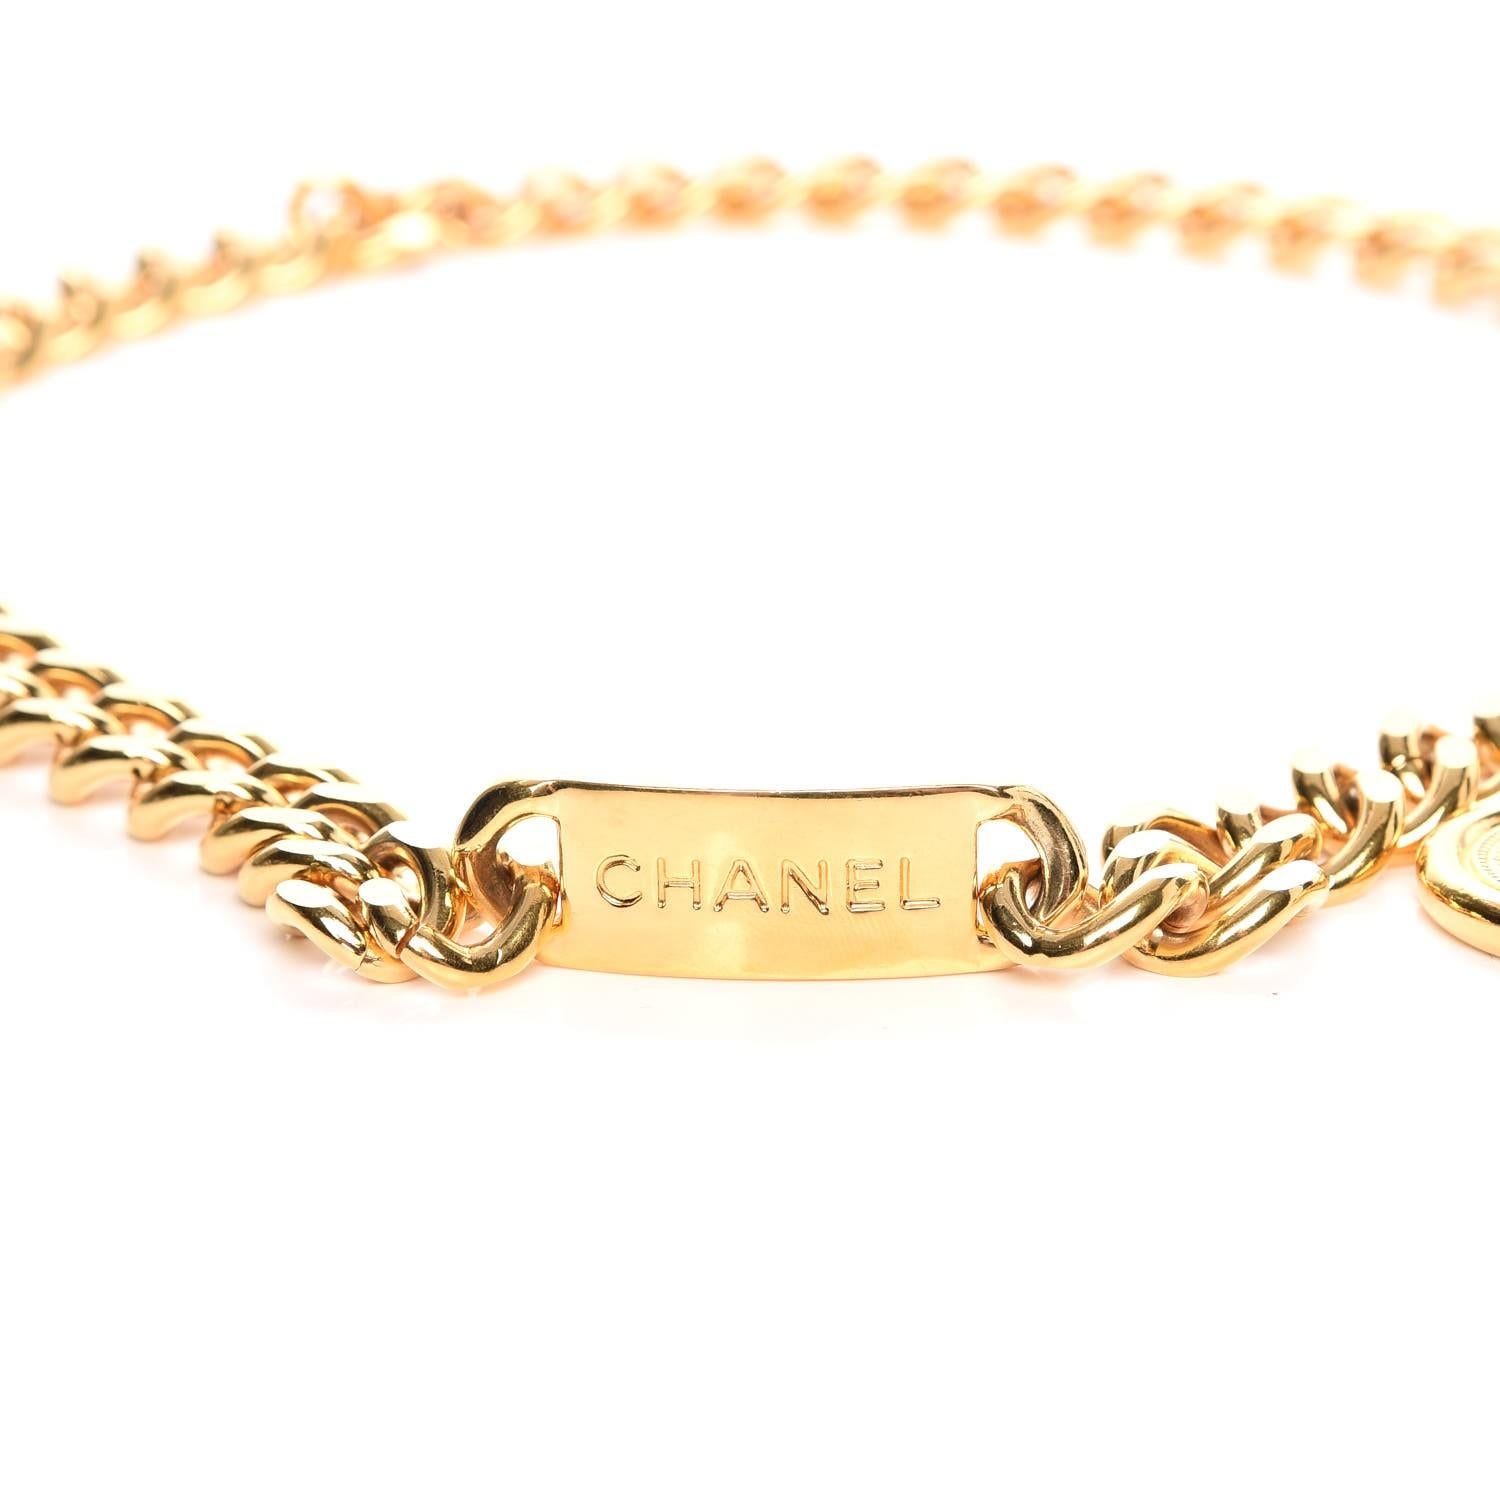 Chanel CC Gold Medal Vintage Chain Belt, features a medallion with 31 Rue Cambon Paris engraved. Chanel tag located on the back side. 

COLOR: Gold tone
MATERIAL: Brass
MEASURES: Length of chain 37.5”. Medallion diameter 1.2”.
CONDITION: Good - this